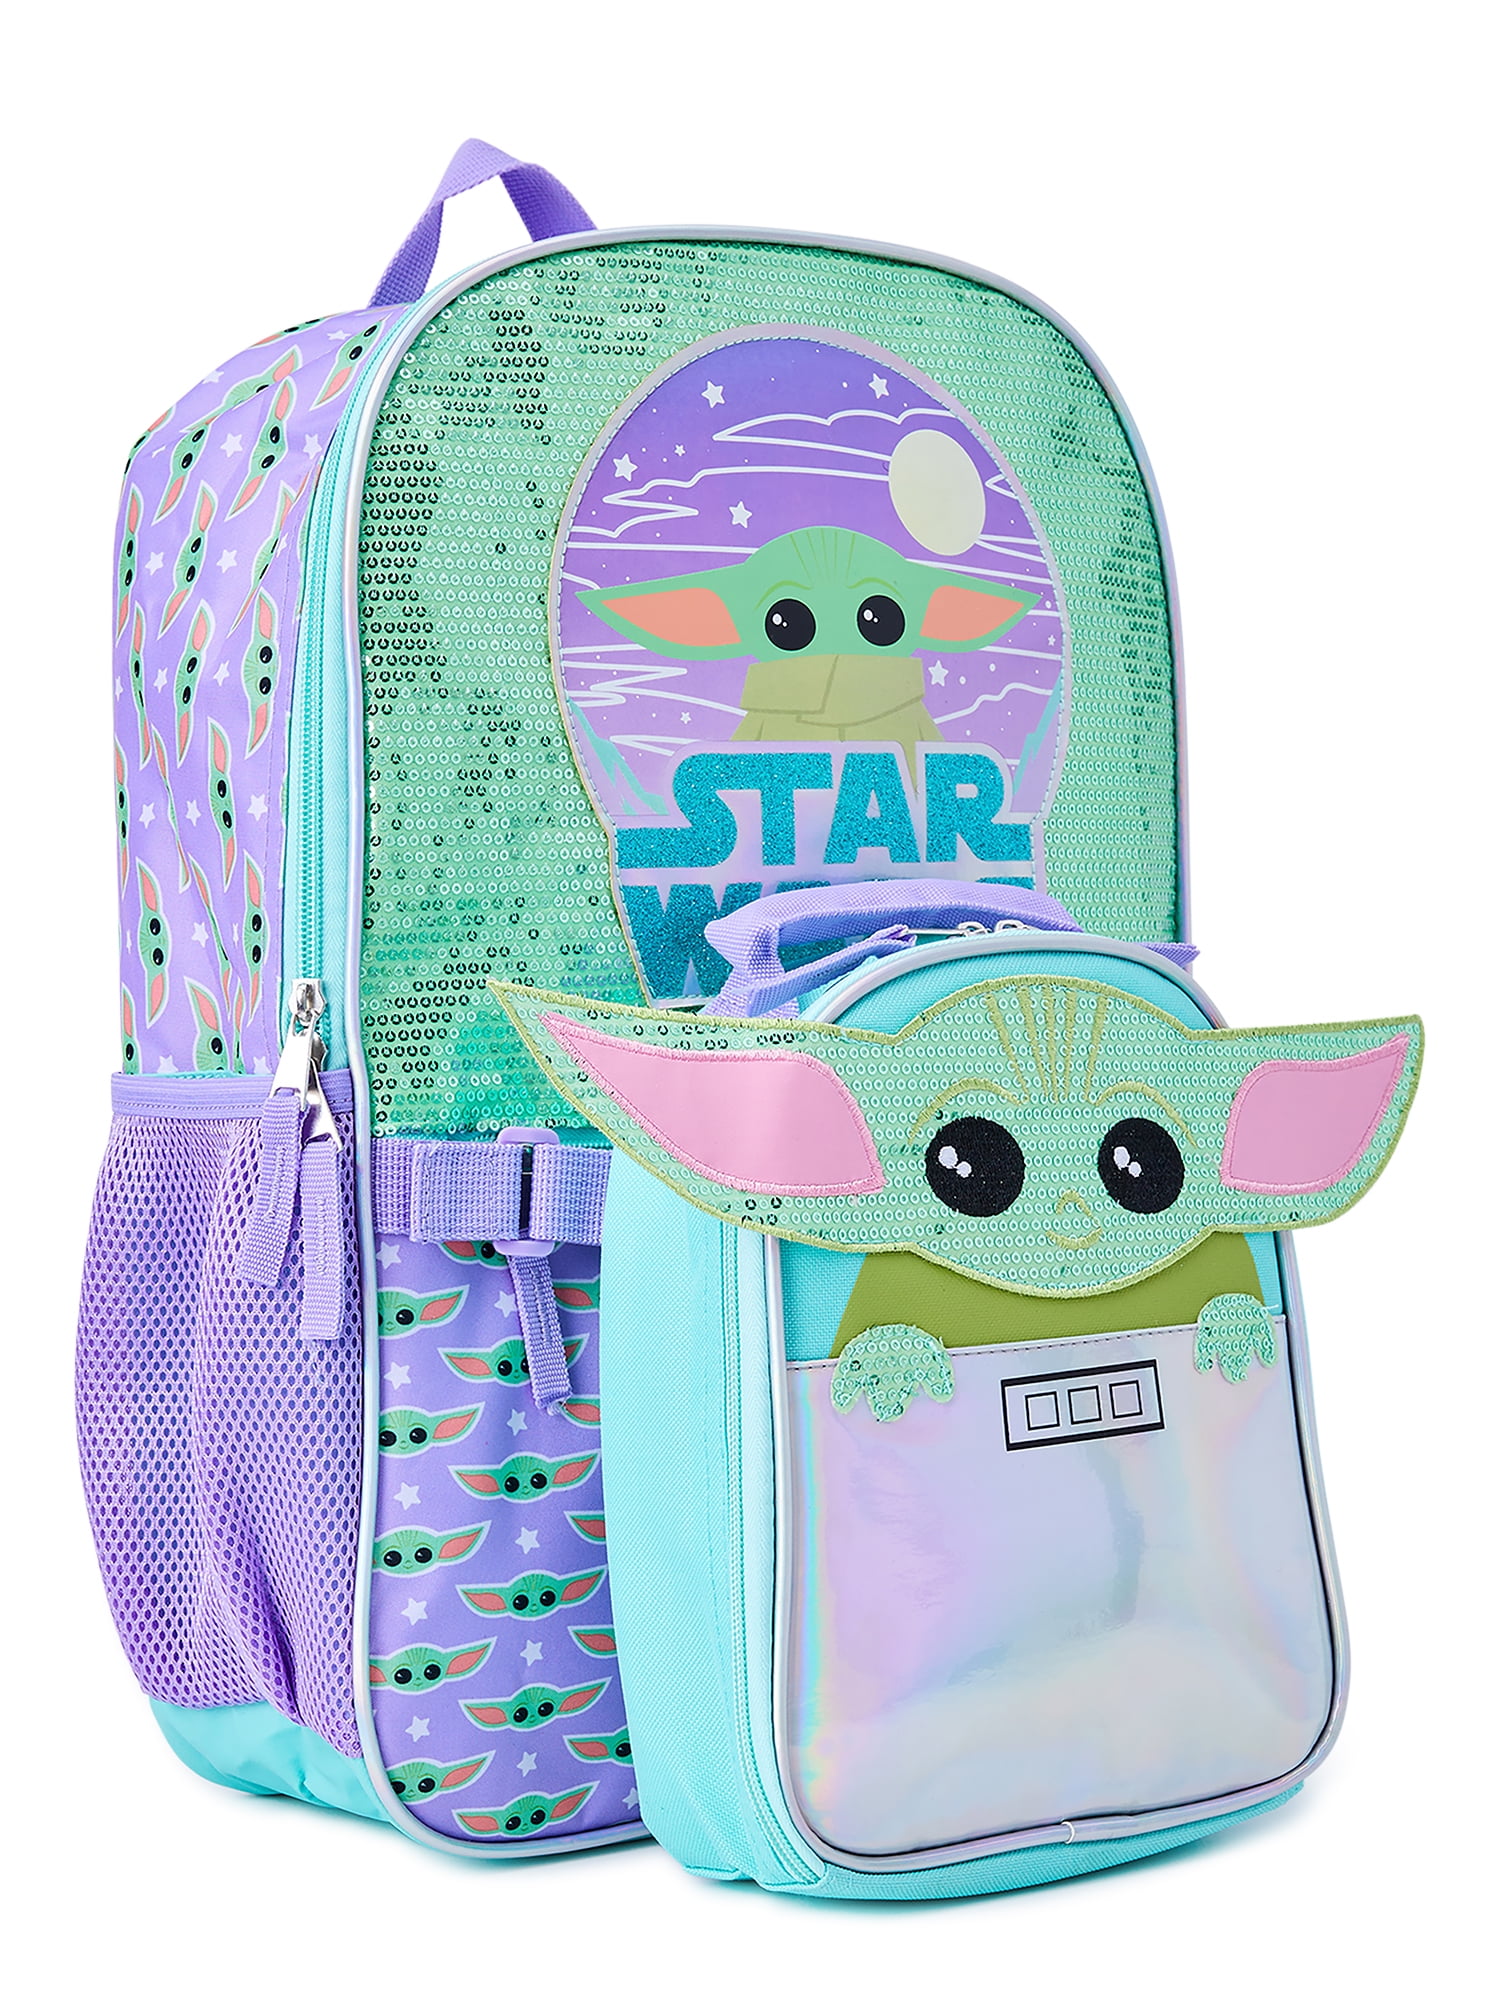 Star Wars Mandalorian Baby Yoda Girls 17" Laptop Backpack 2-Piece Set with Lunch Tote Bag, Purple Green